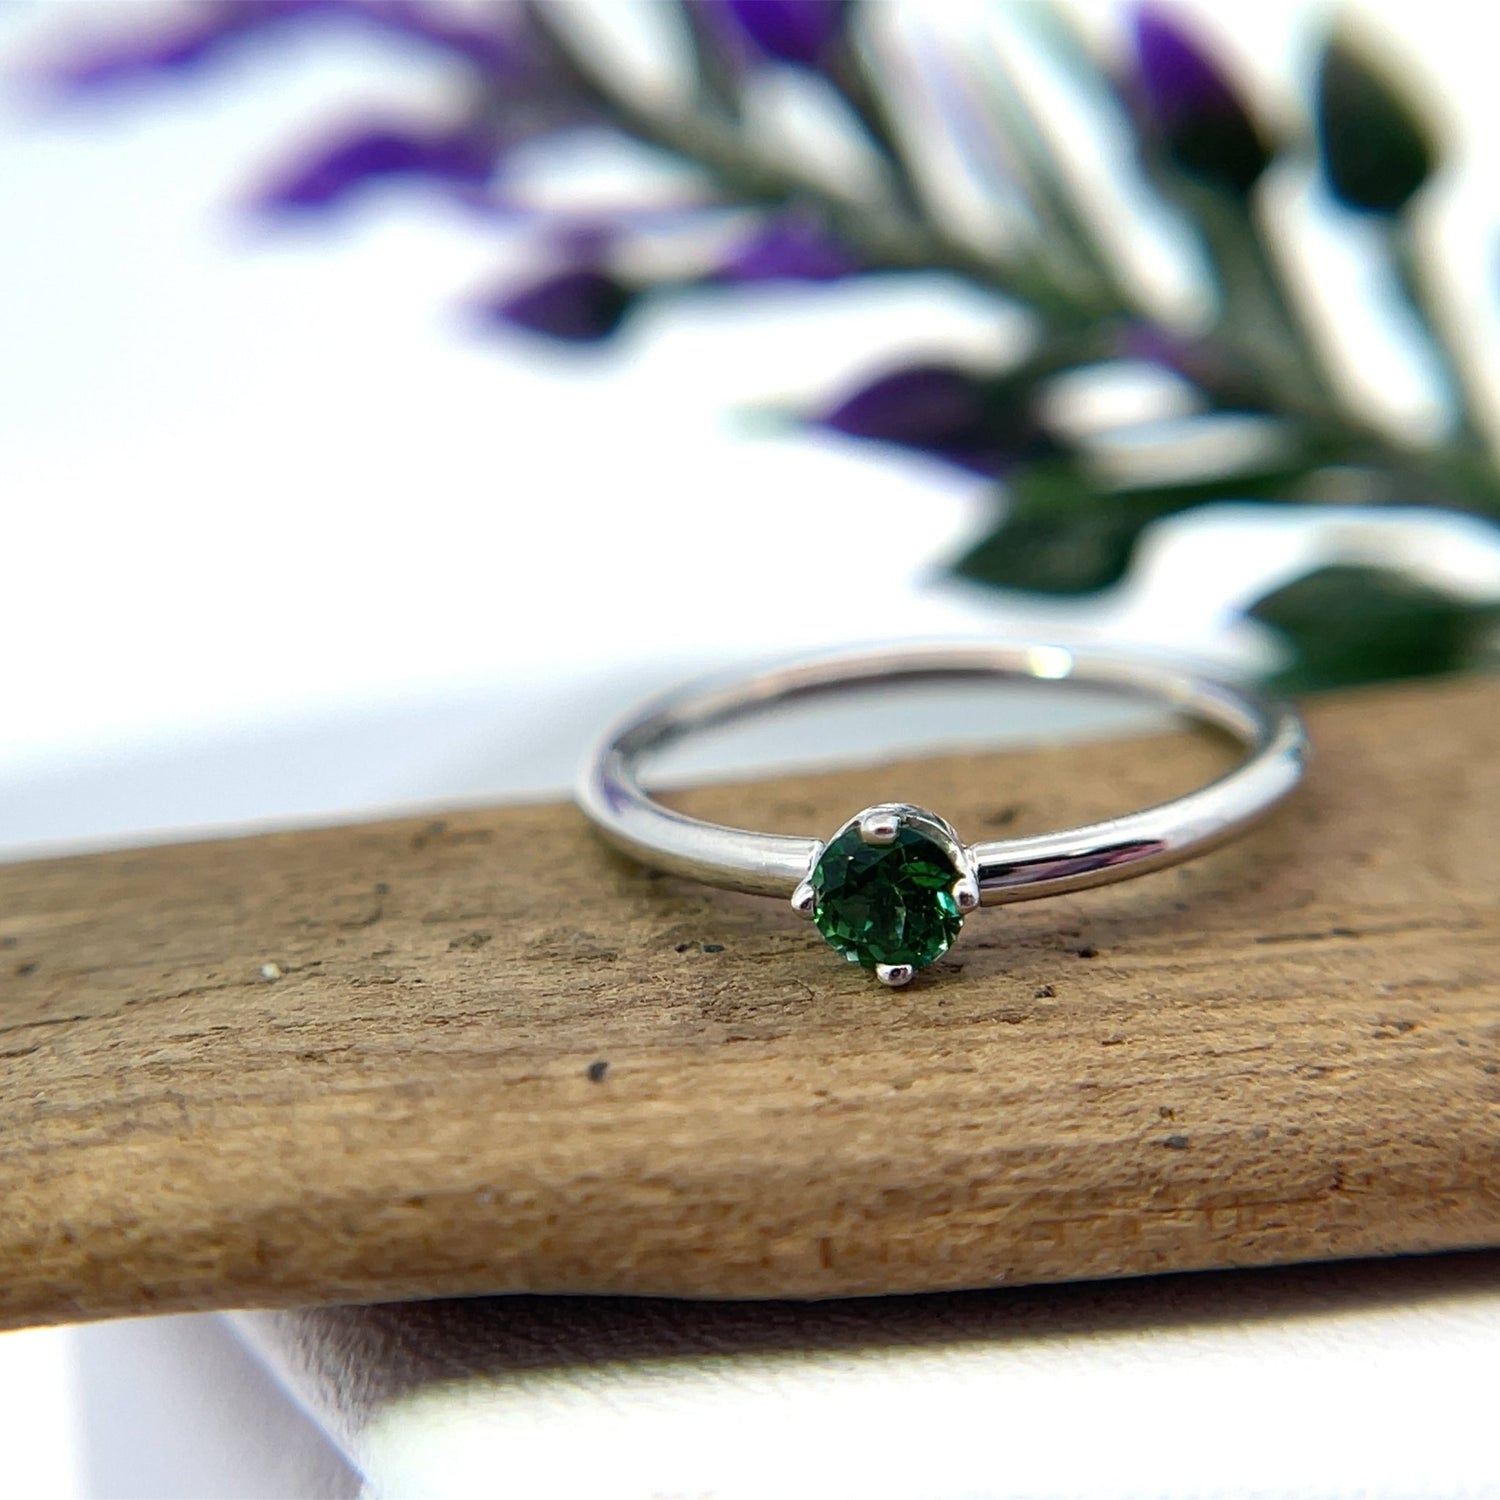 Fixed Ring with 3mm Round Prong Set Gemstone - Navel Orientation - Agave in Bloom